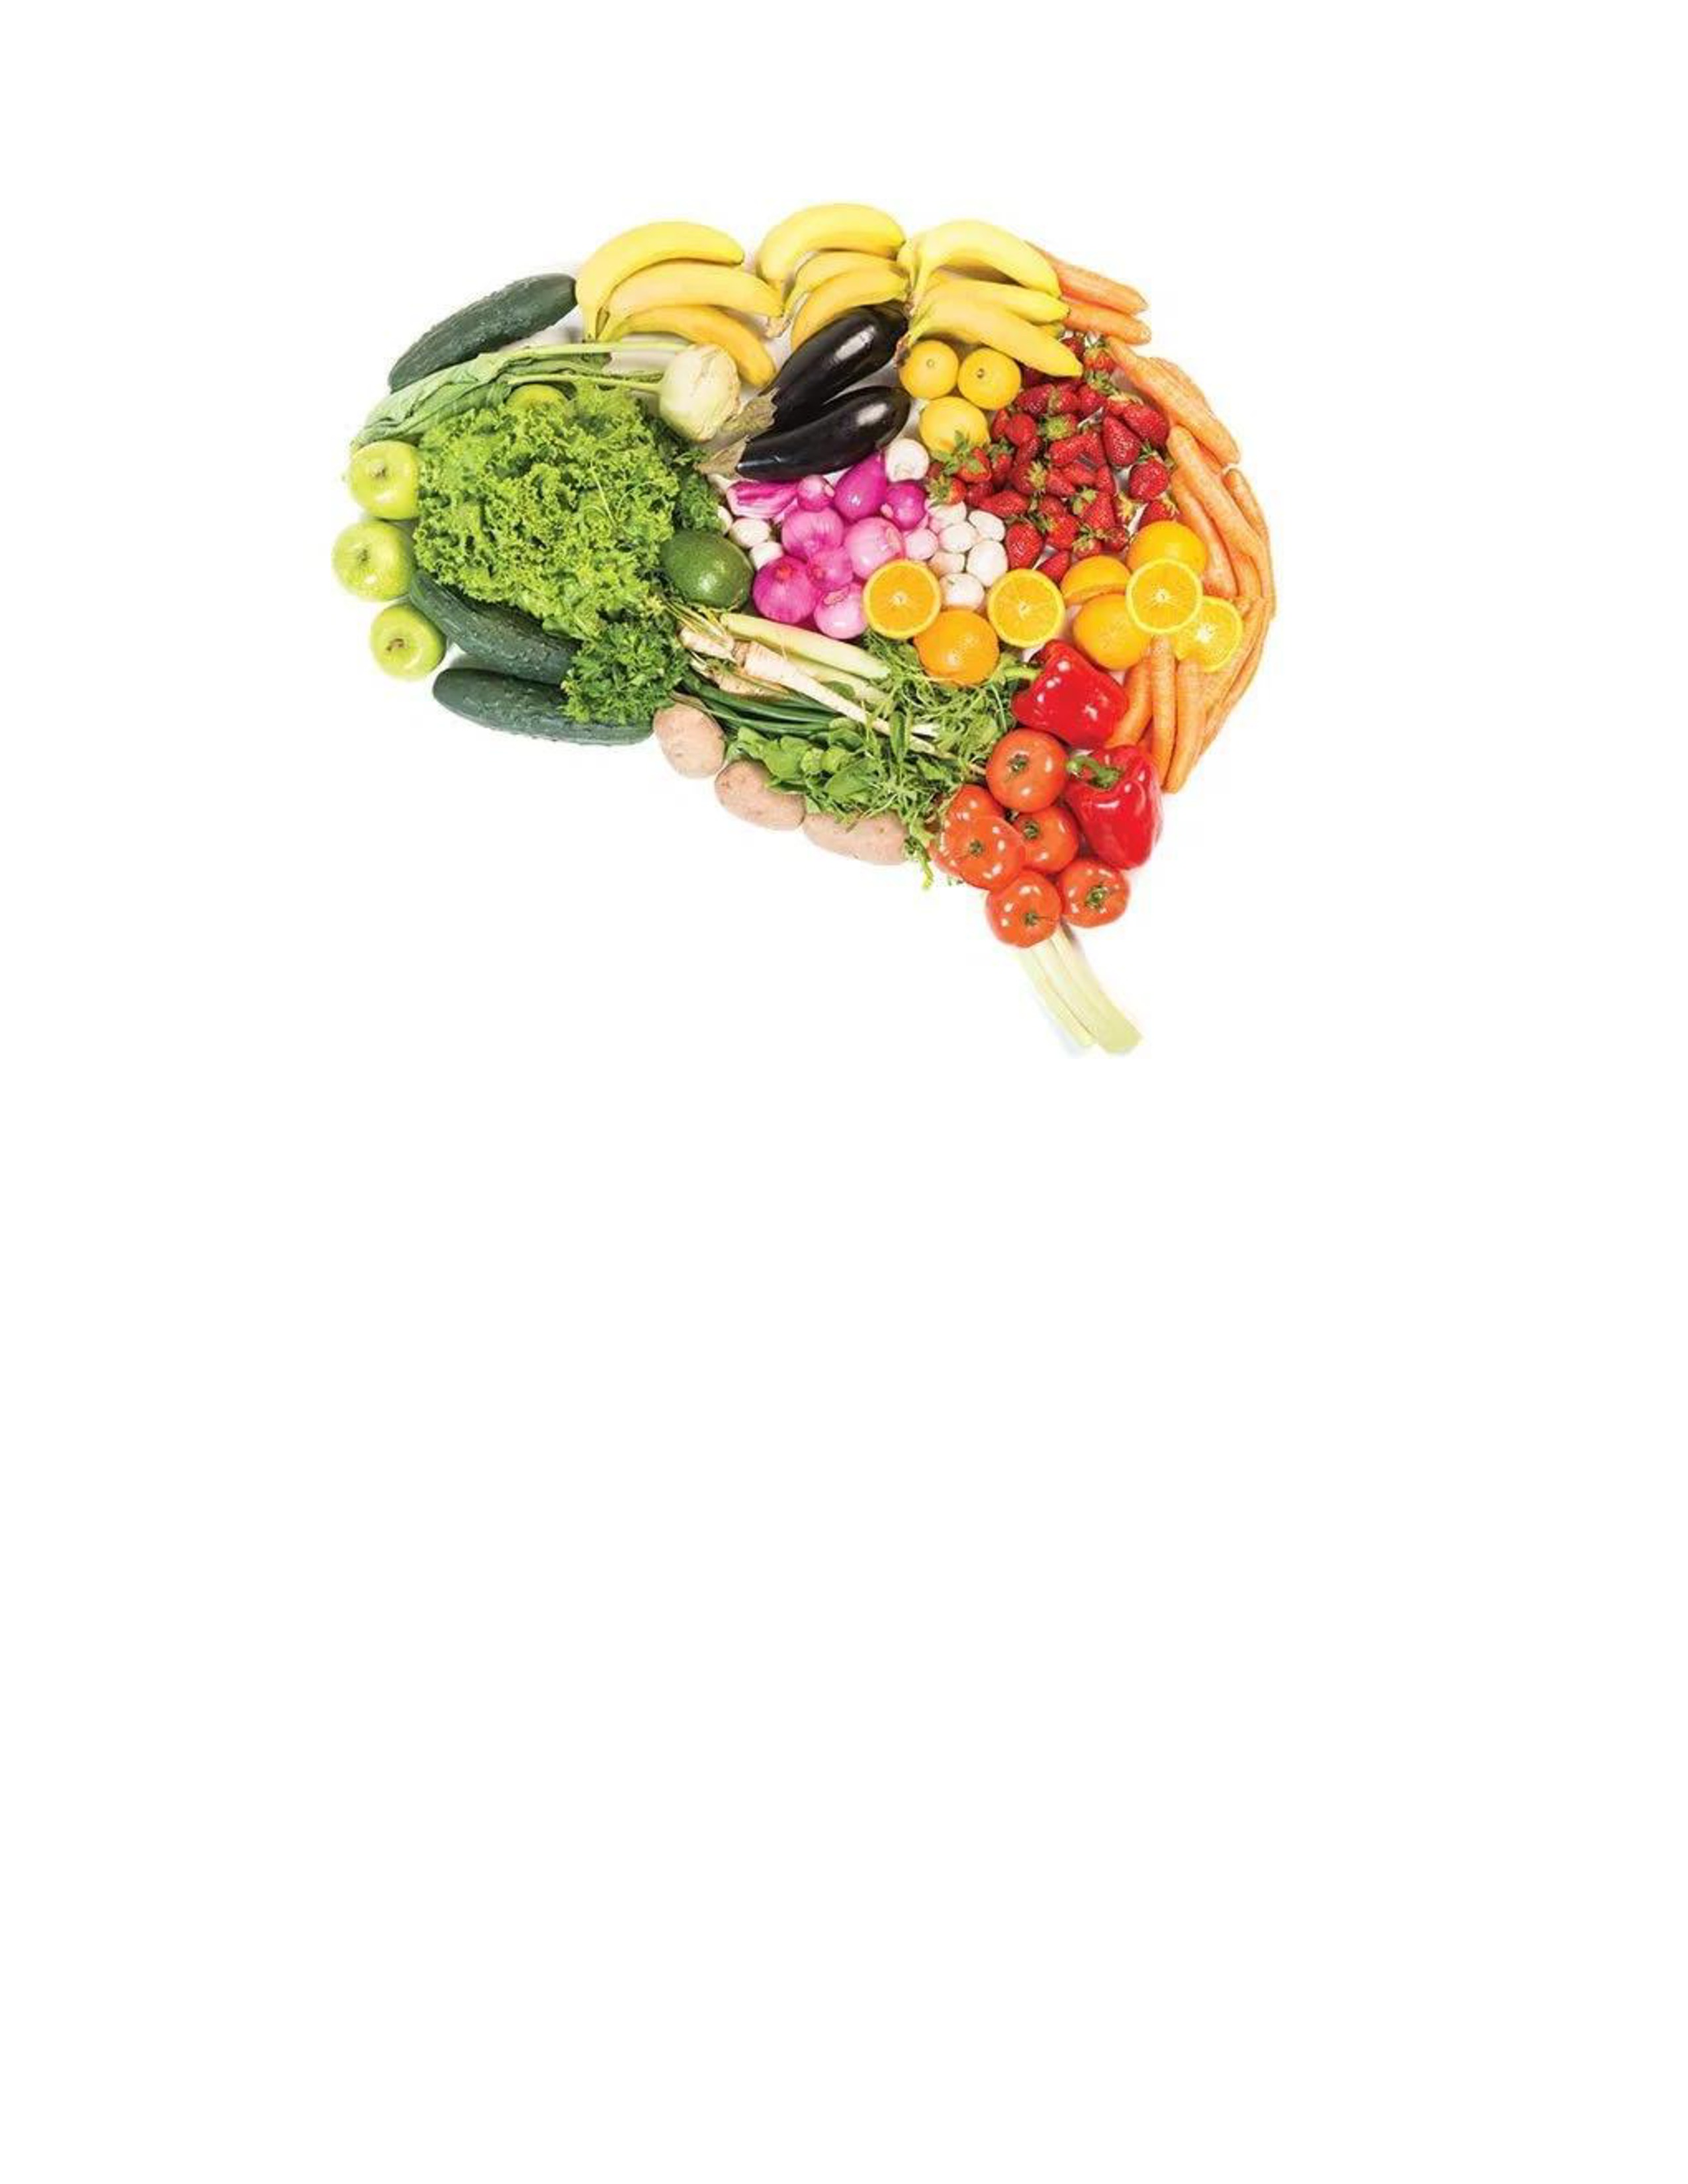 friuts and vegetables arranged in the shape of a brain